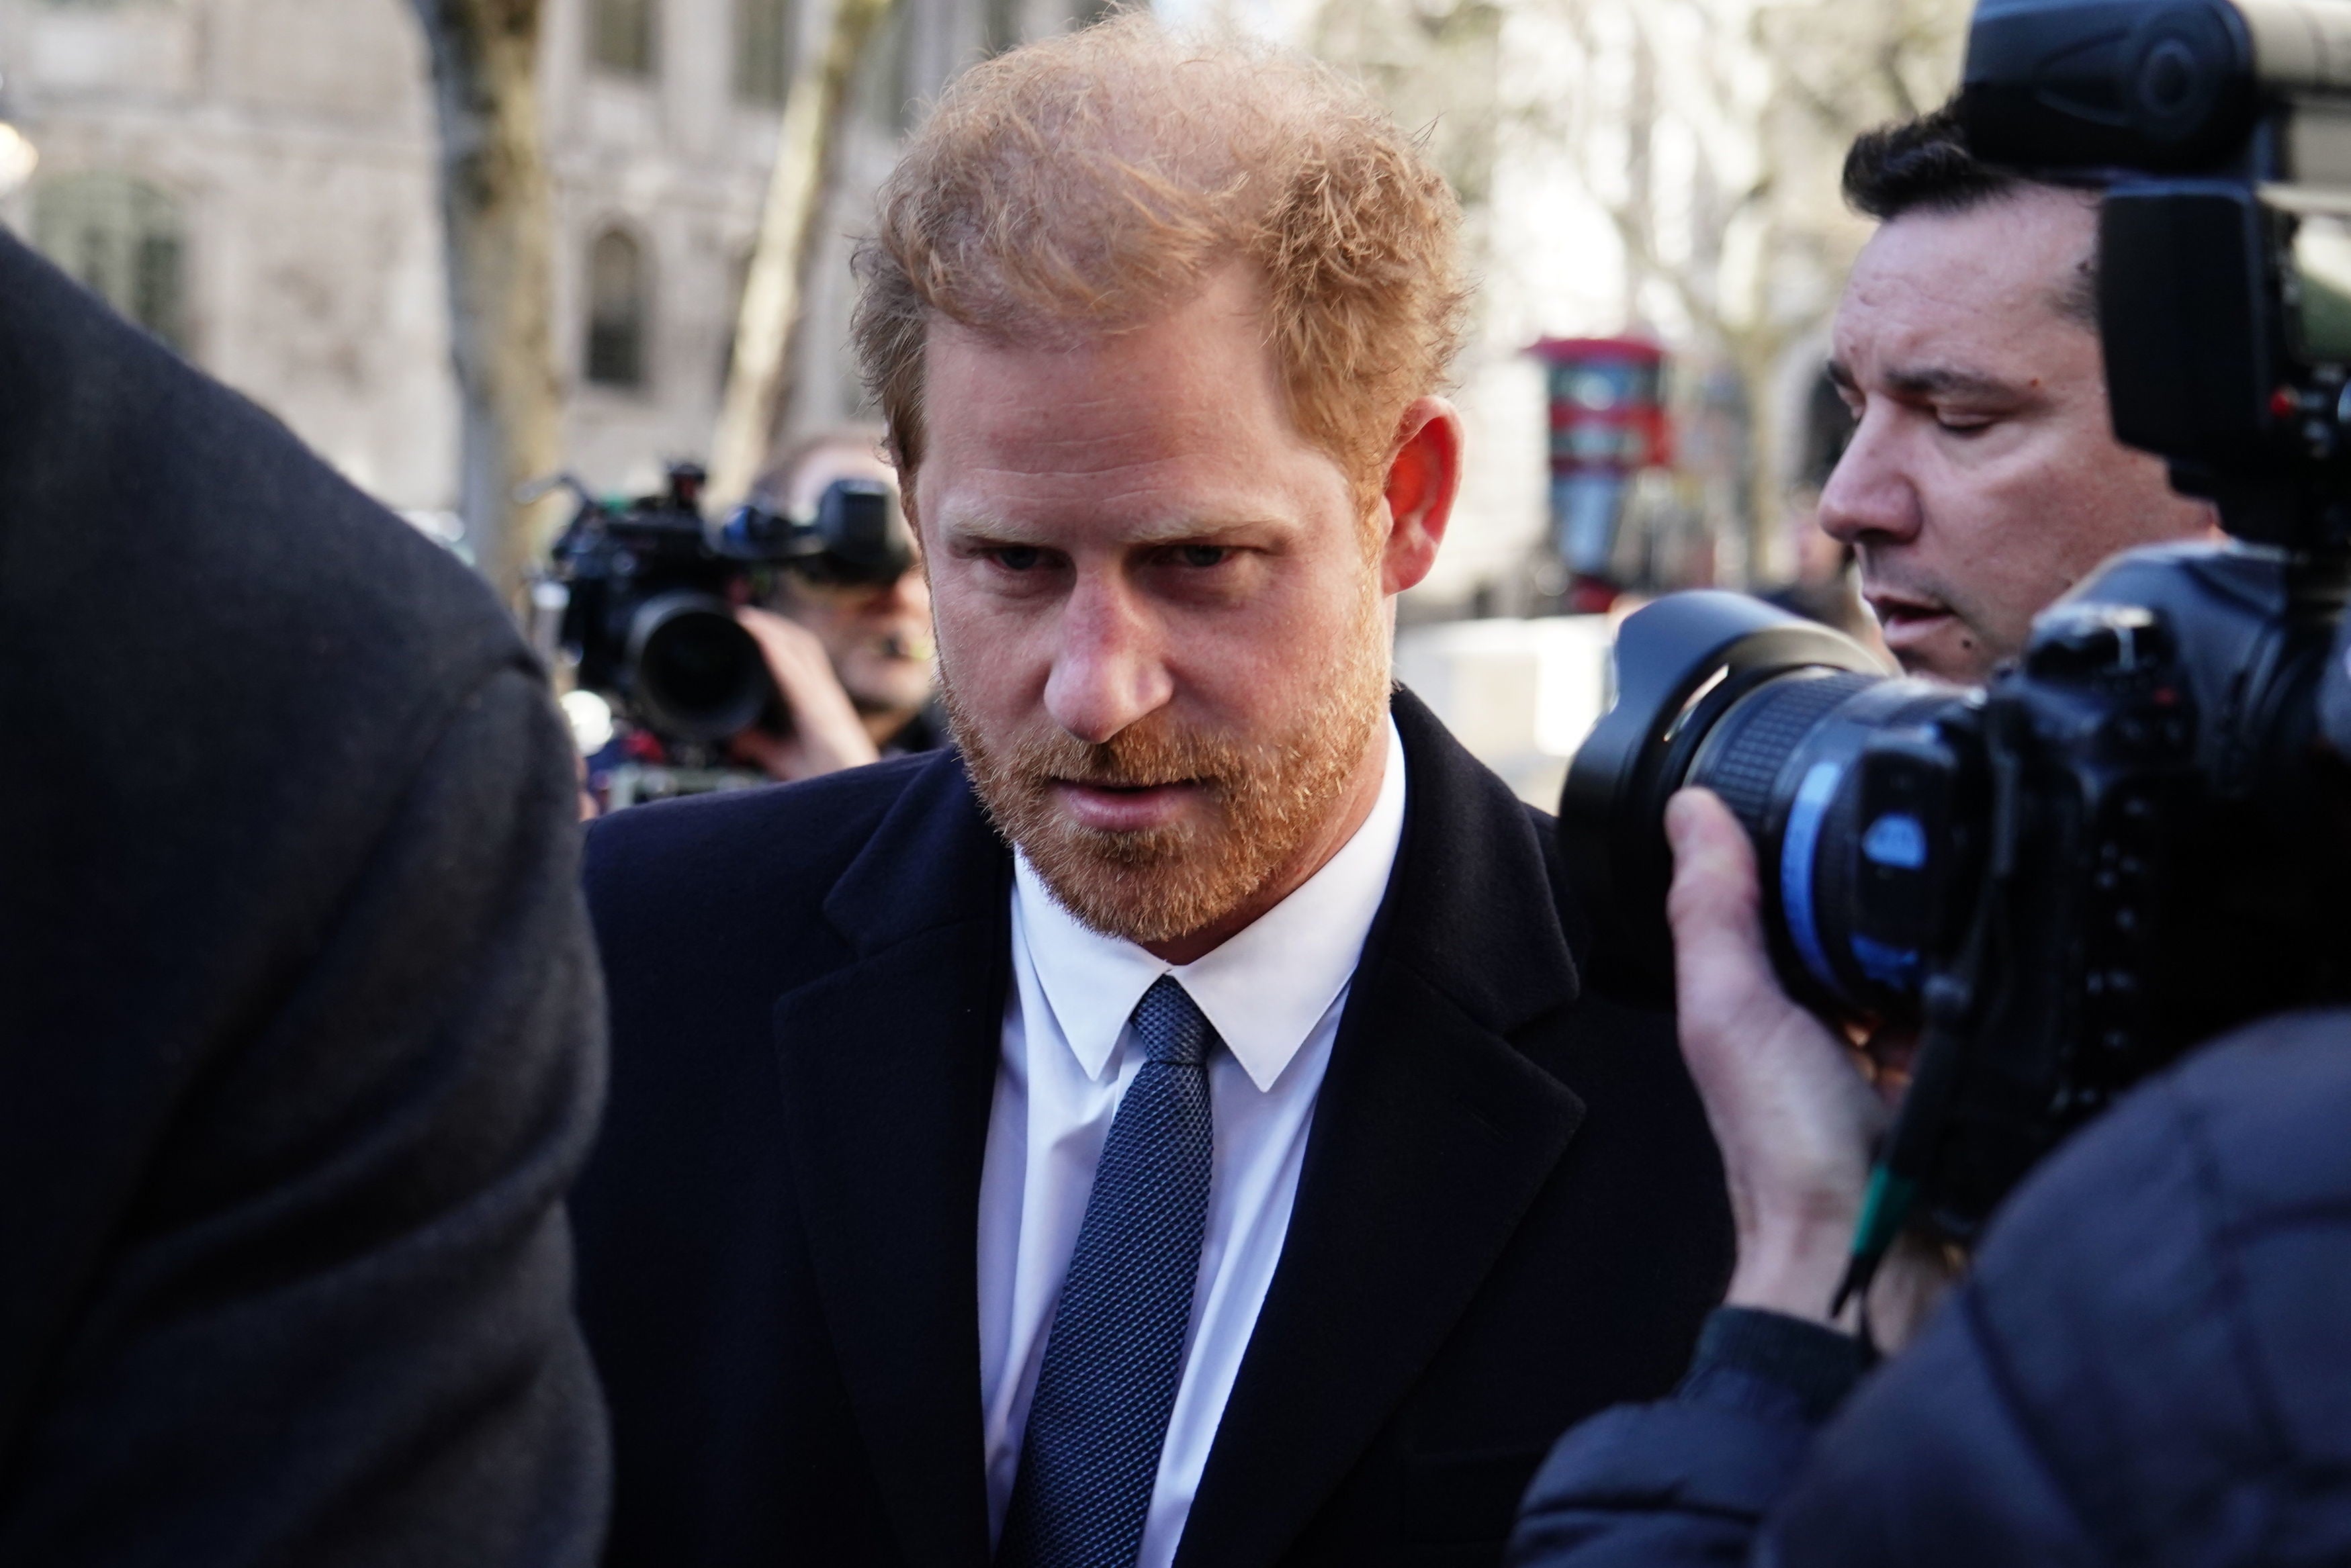 Prince Harry made an unexpected appearance at the Royal Courts Of Justice on Monday